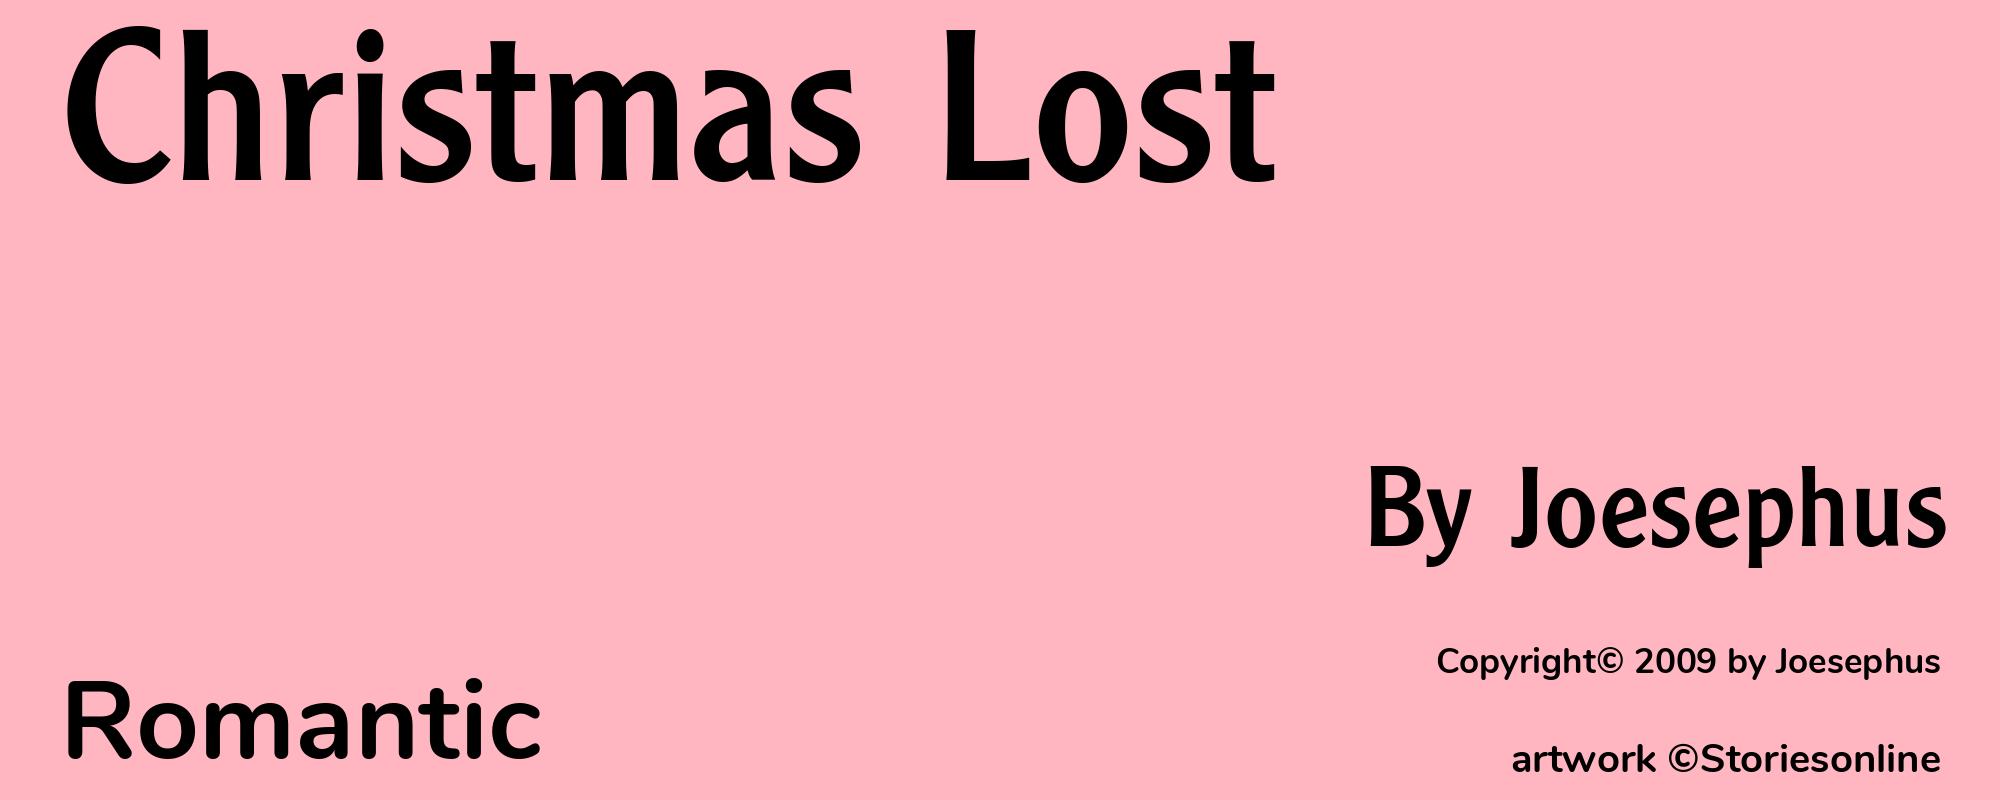 Christmas Lost - Cover